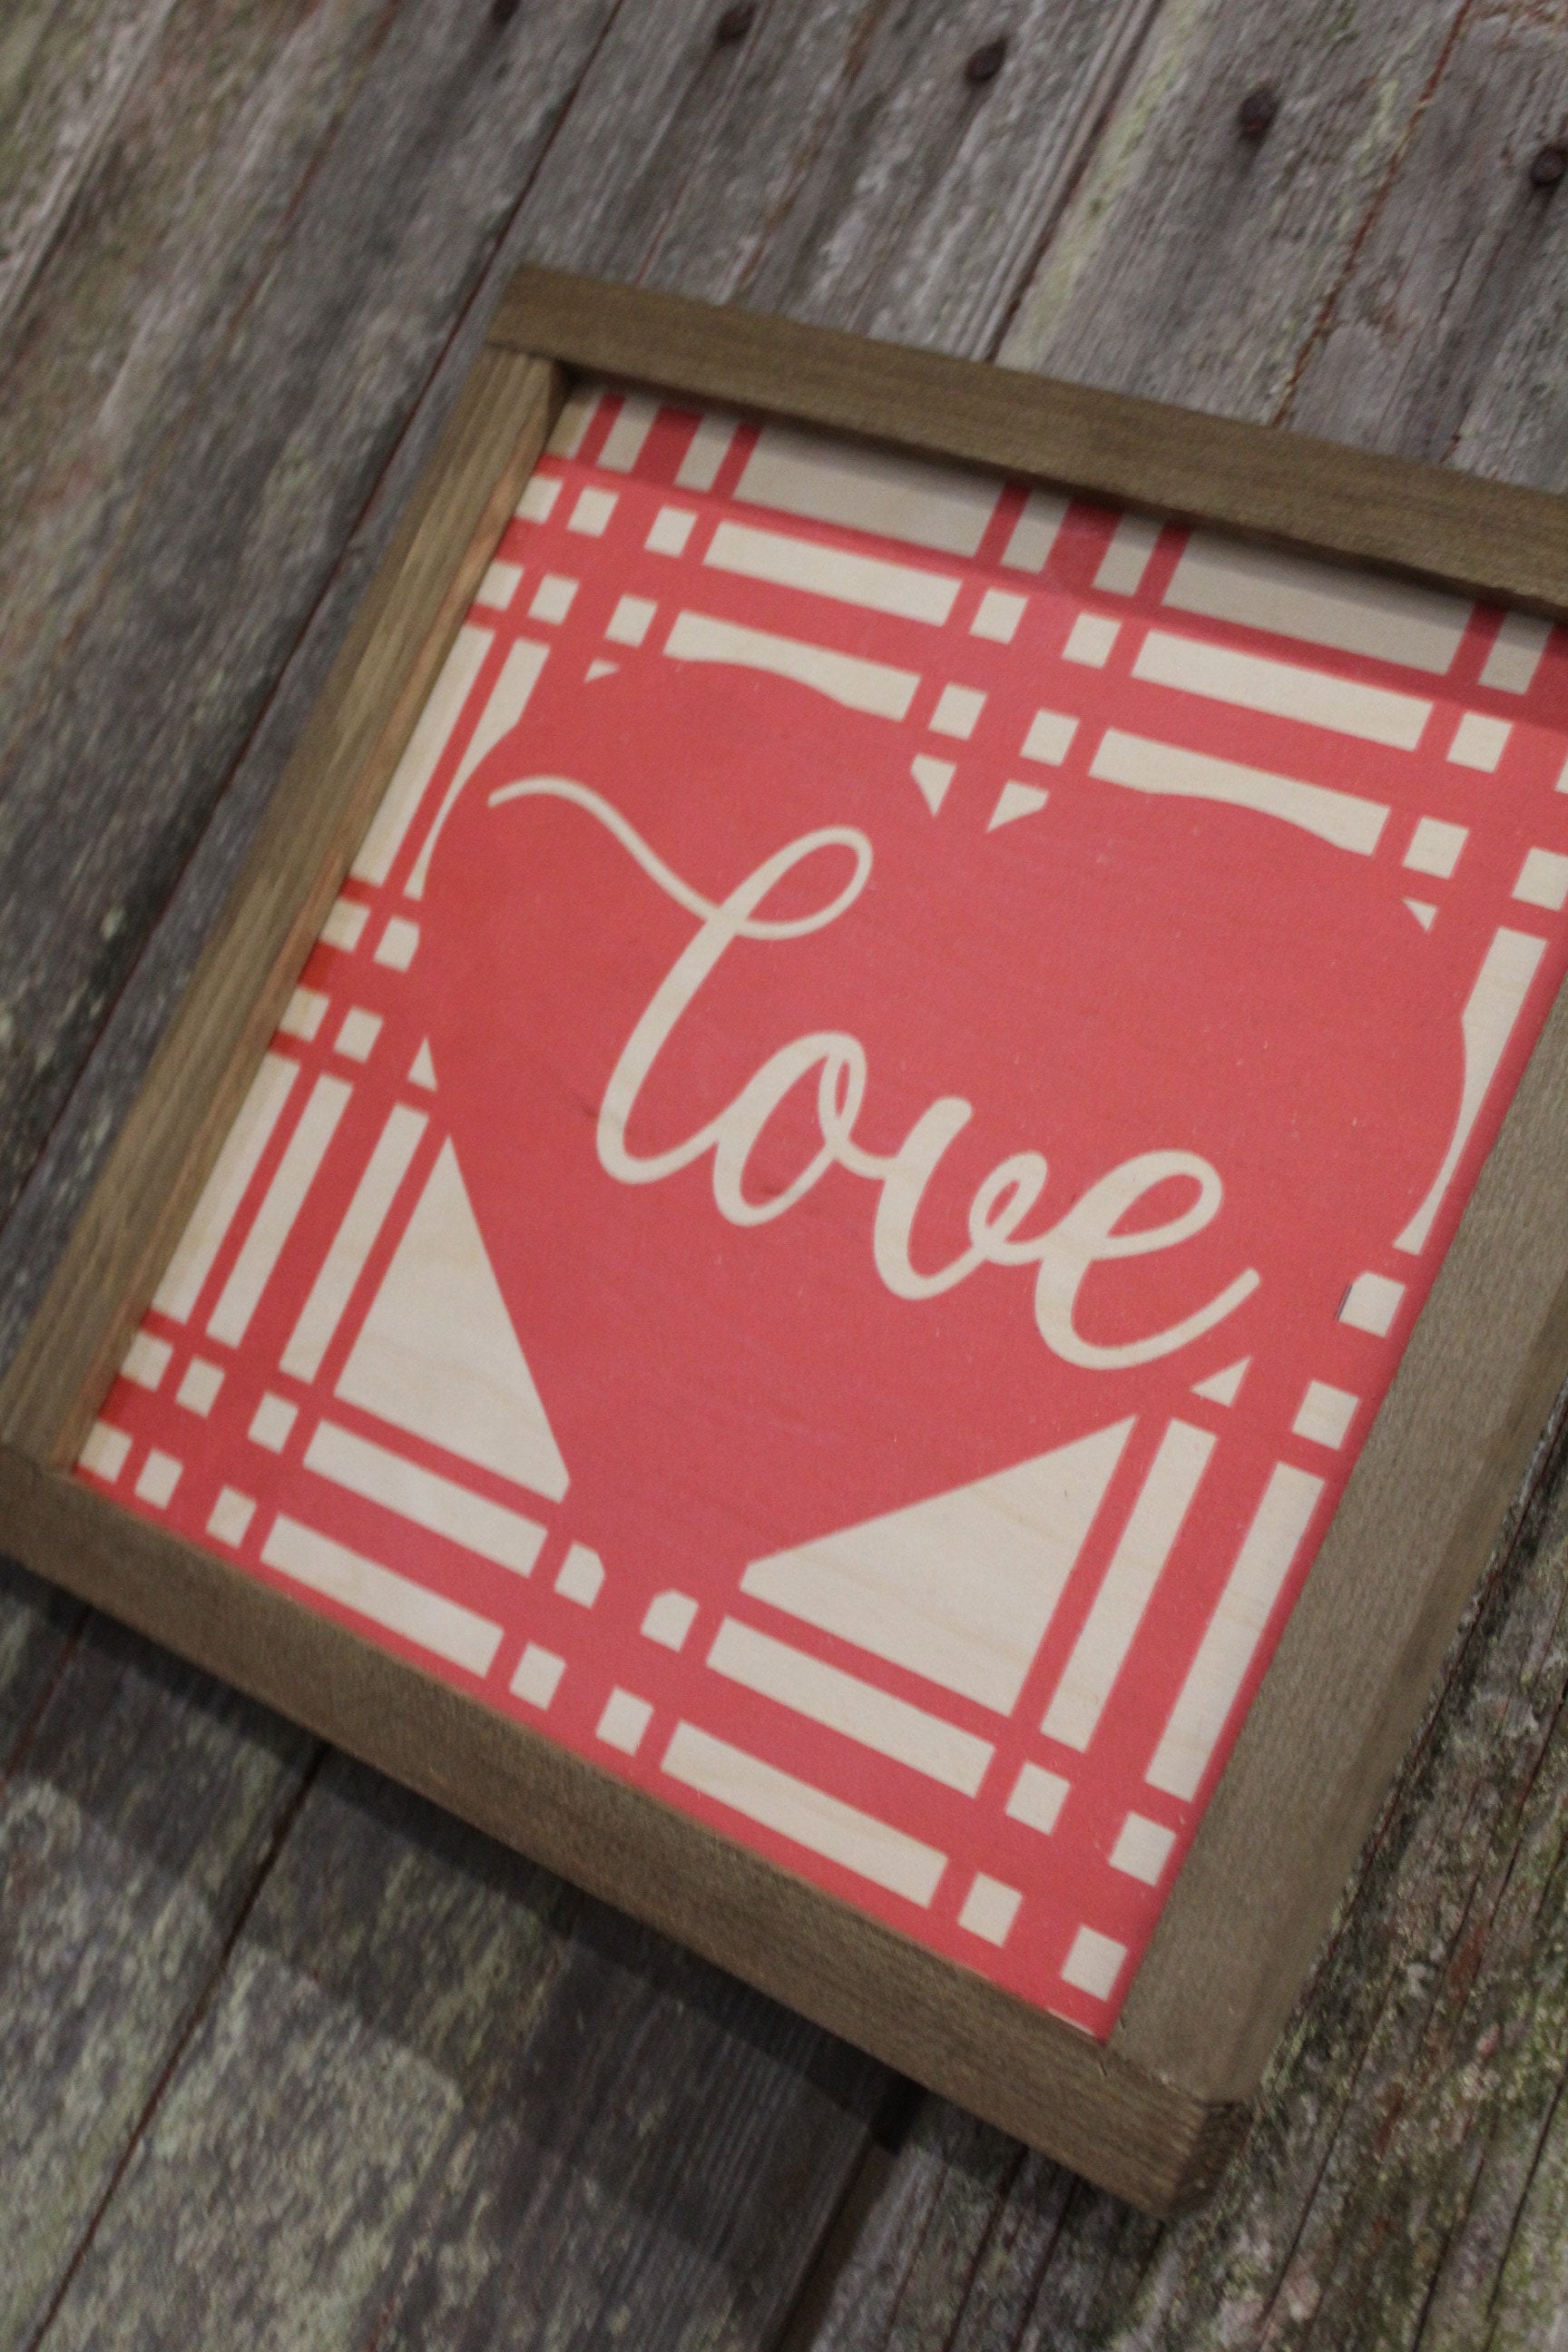 Valentines Wood Sign Love Plaid Valentines Day Hearts Red Pink Brown Framed Print Wall Art Farmhouse Primitive Rustic